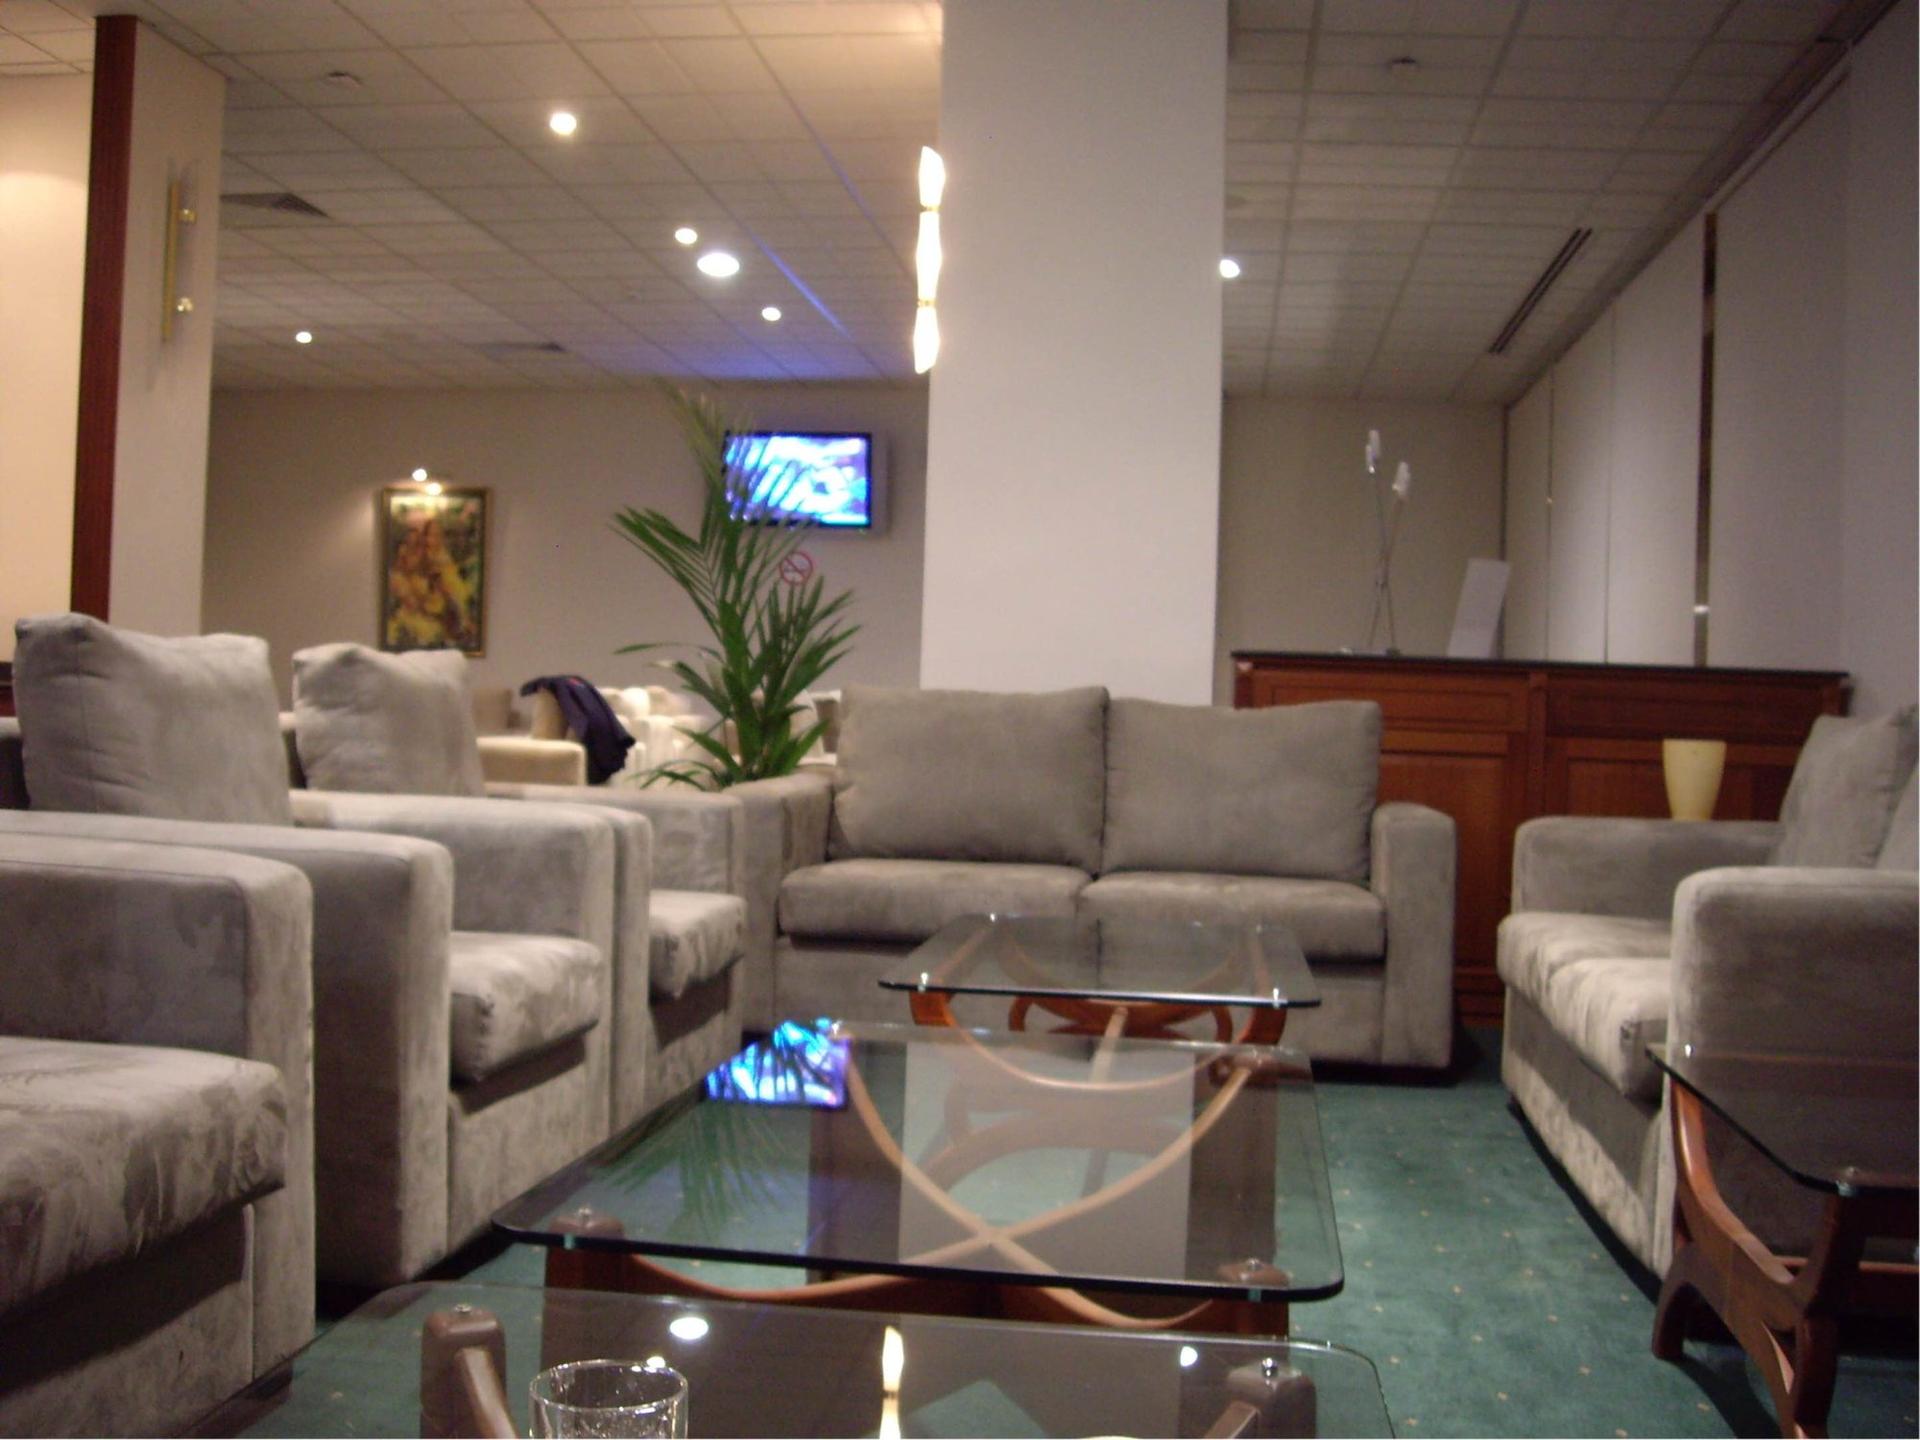 Lotus First Class Lounge image 9 of 22